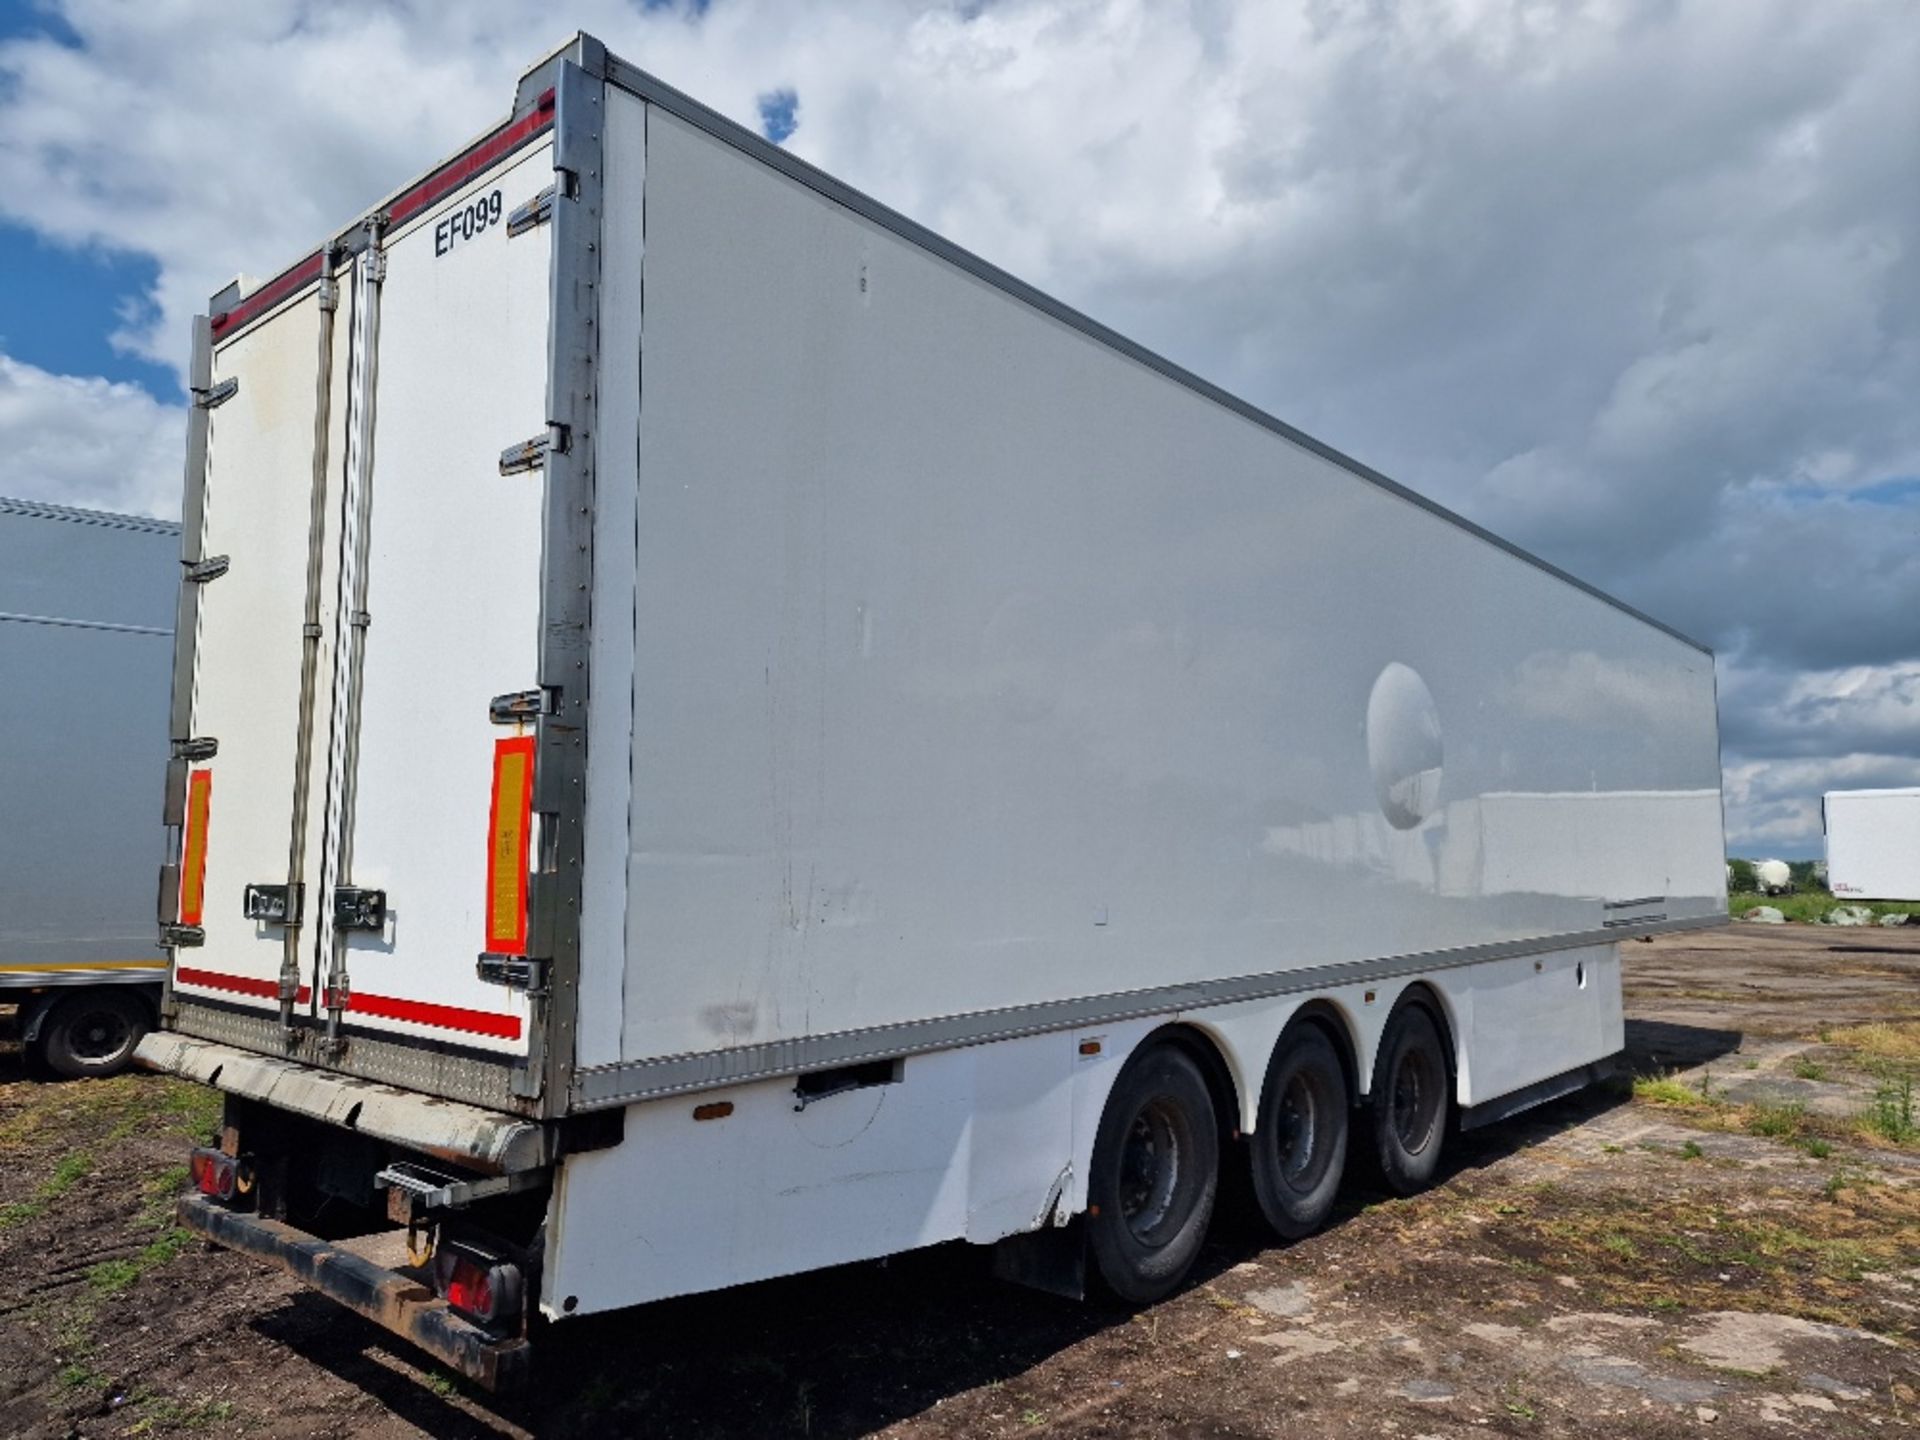 EF099 - 2009 Montracon 13.6m Tri-Axle Refrigerated Trailer - Image 12 of 21